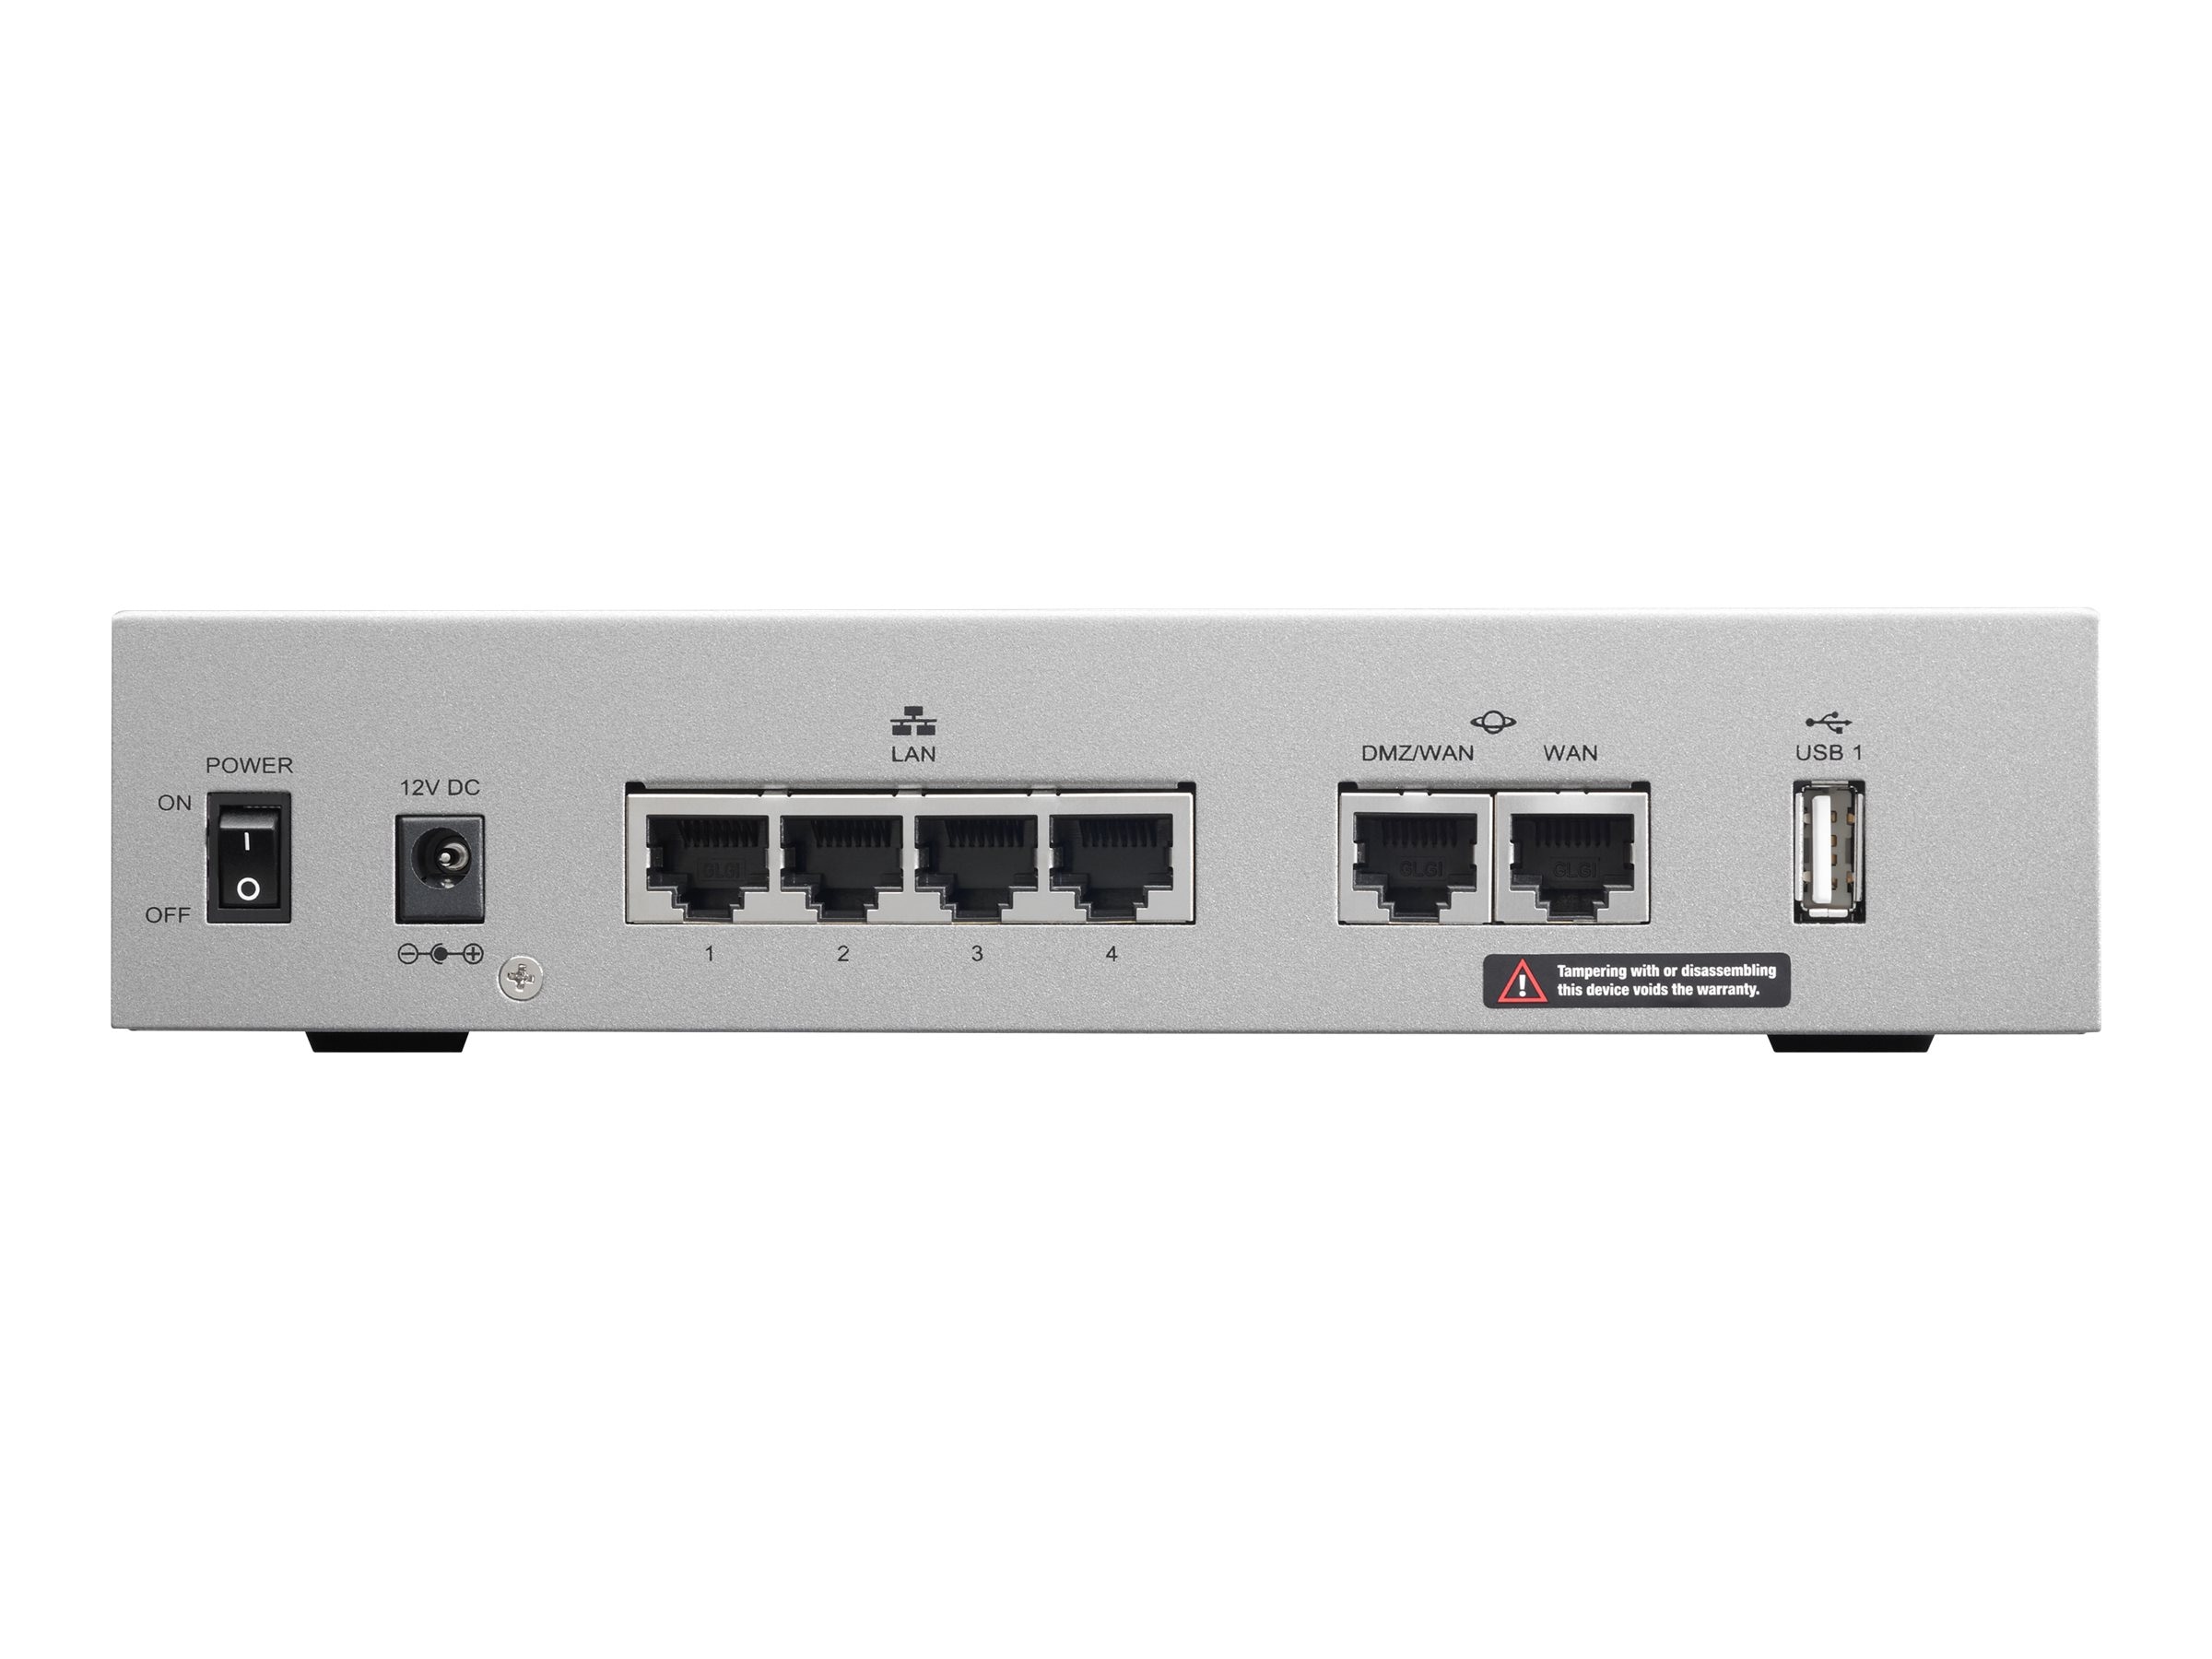 Маршрутизатор Cisco rv320 Dual Gigabit Wan VPN Router. Маршрутизатор Cisco 1921 2 Wan 4 lan 3g. Маршрутизатор Cisco rv345p-k9-g5. Cisco Systems Gigabit Dual Wan VPN 14 Port Router.